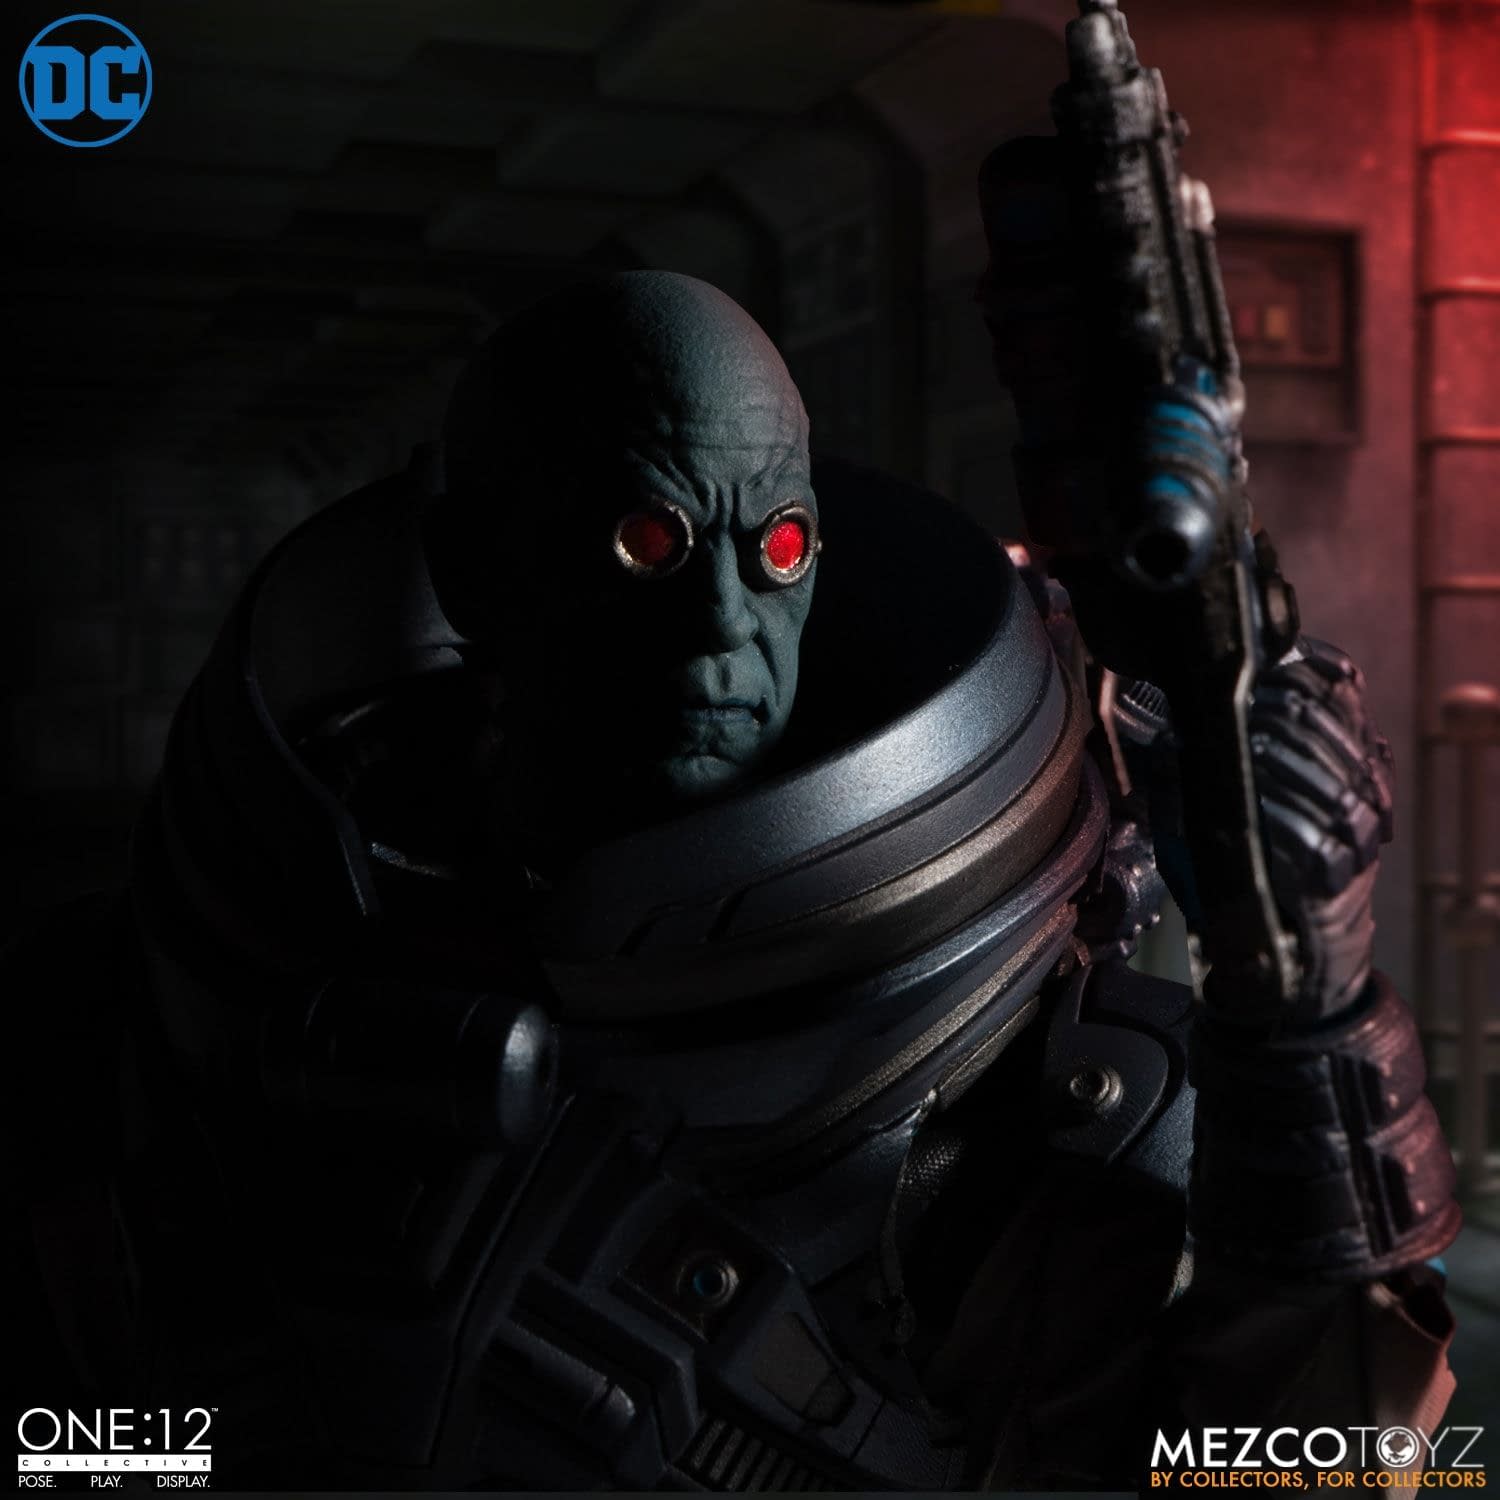 Mr. Freeze Brings the Ice Age with New One:12 Mezco Toyz